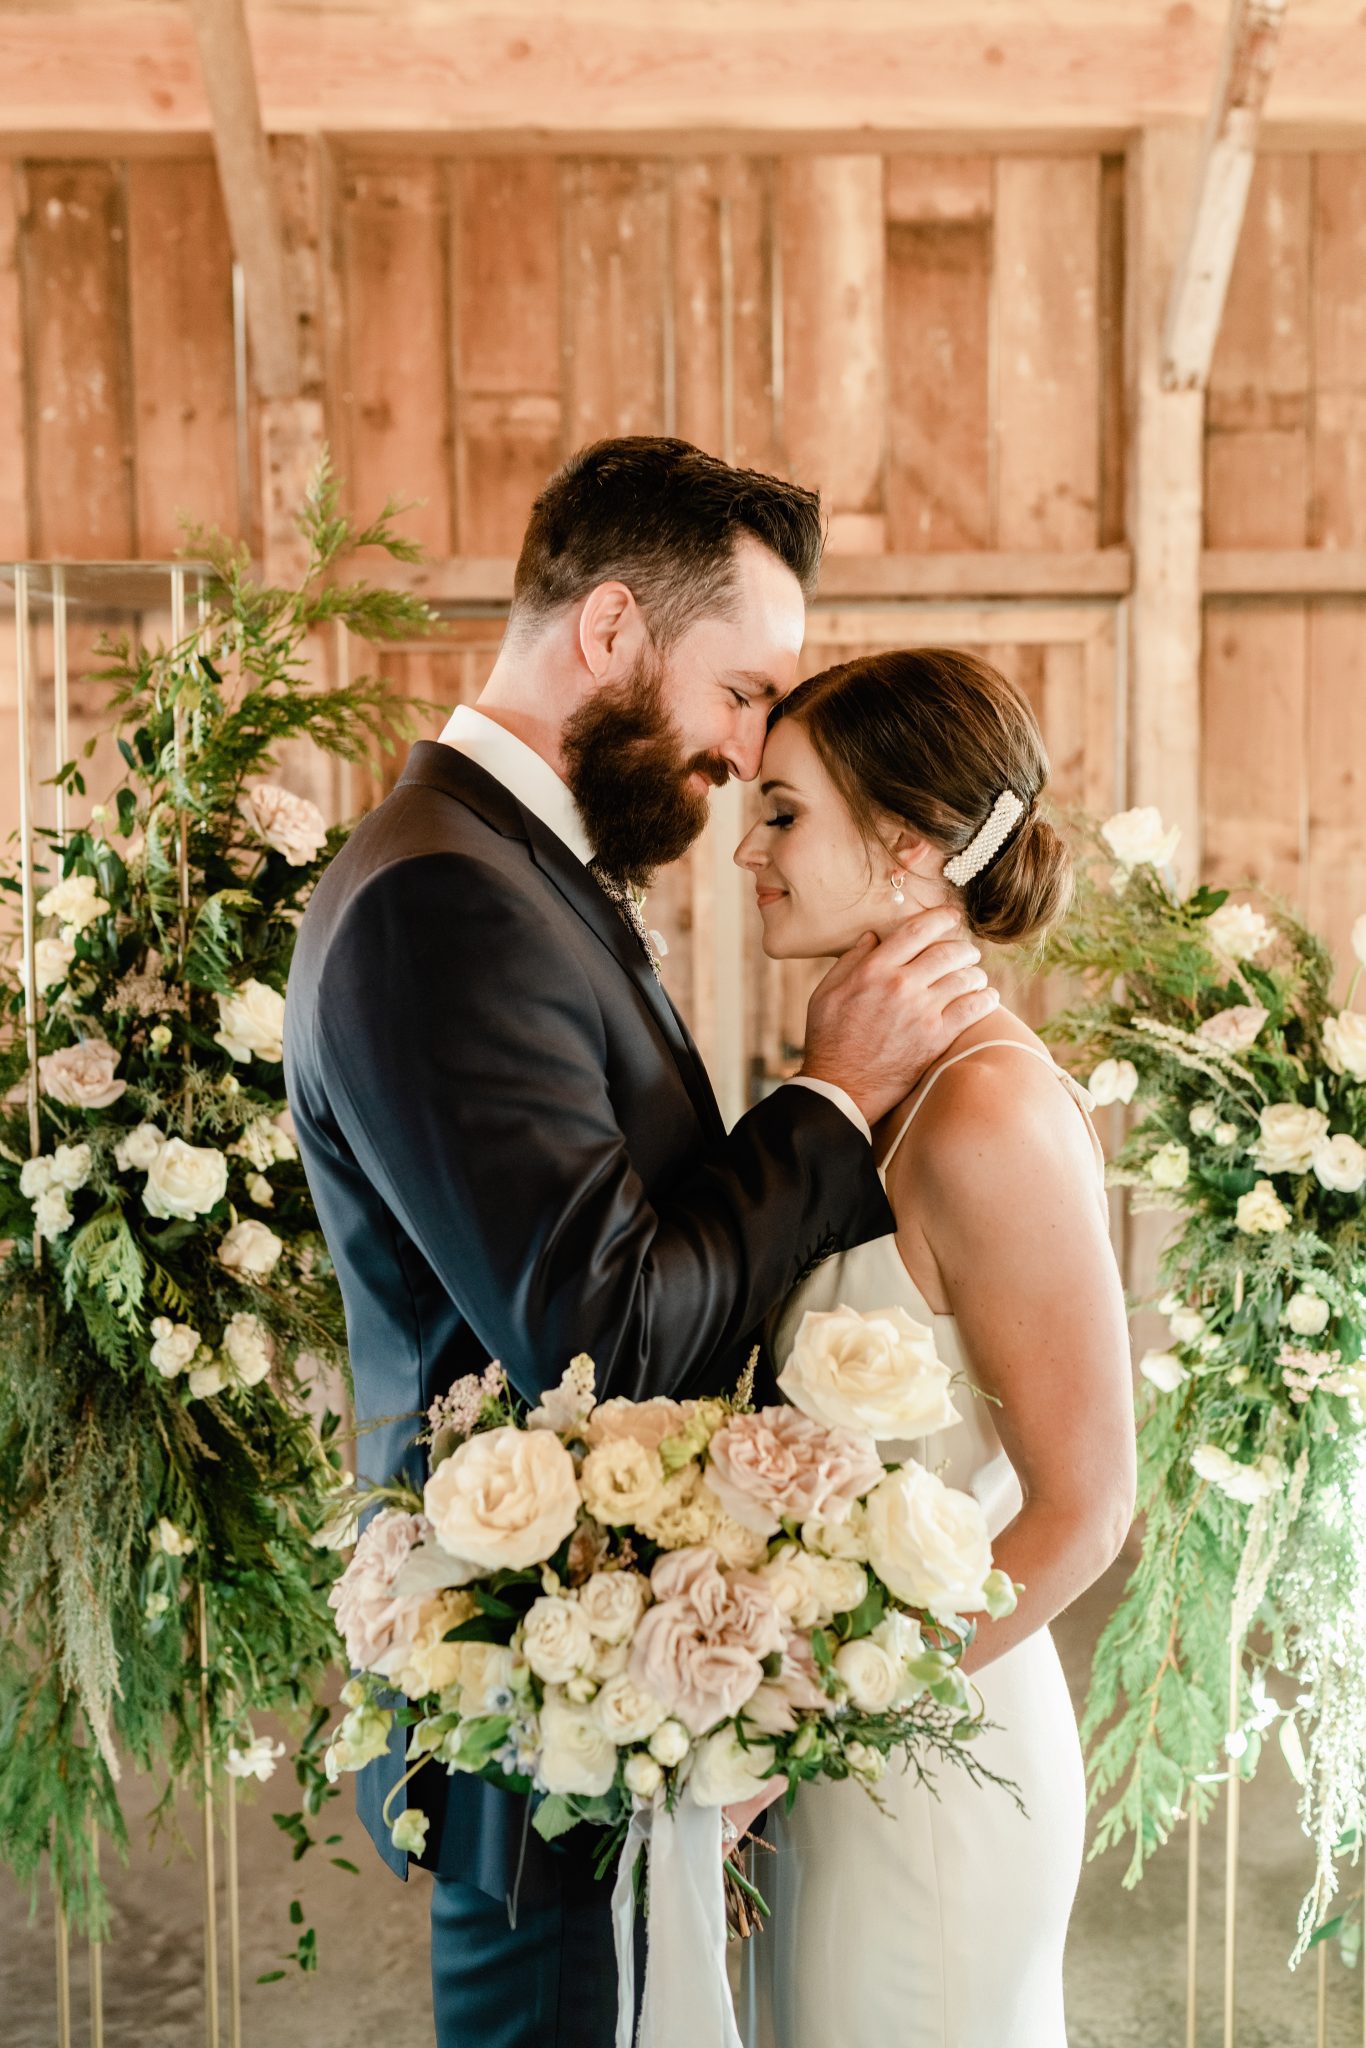 Timeless Heritage Winter Wedding at Countryside Barn Featured on Brontë Bride Groom Style